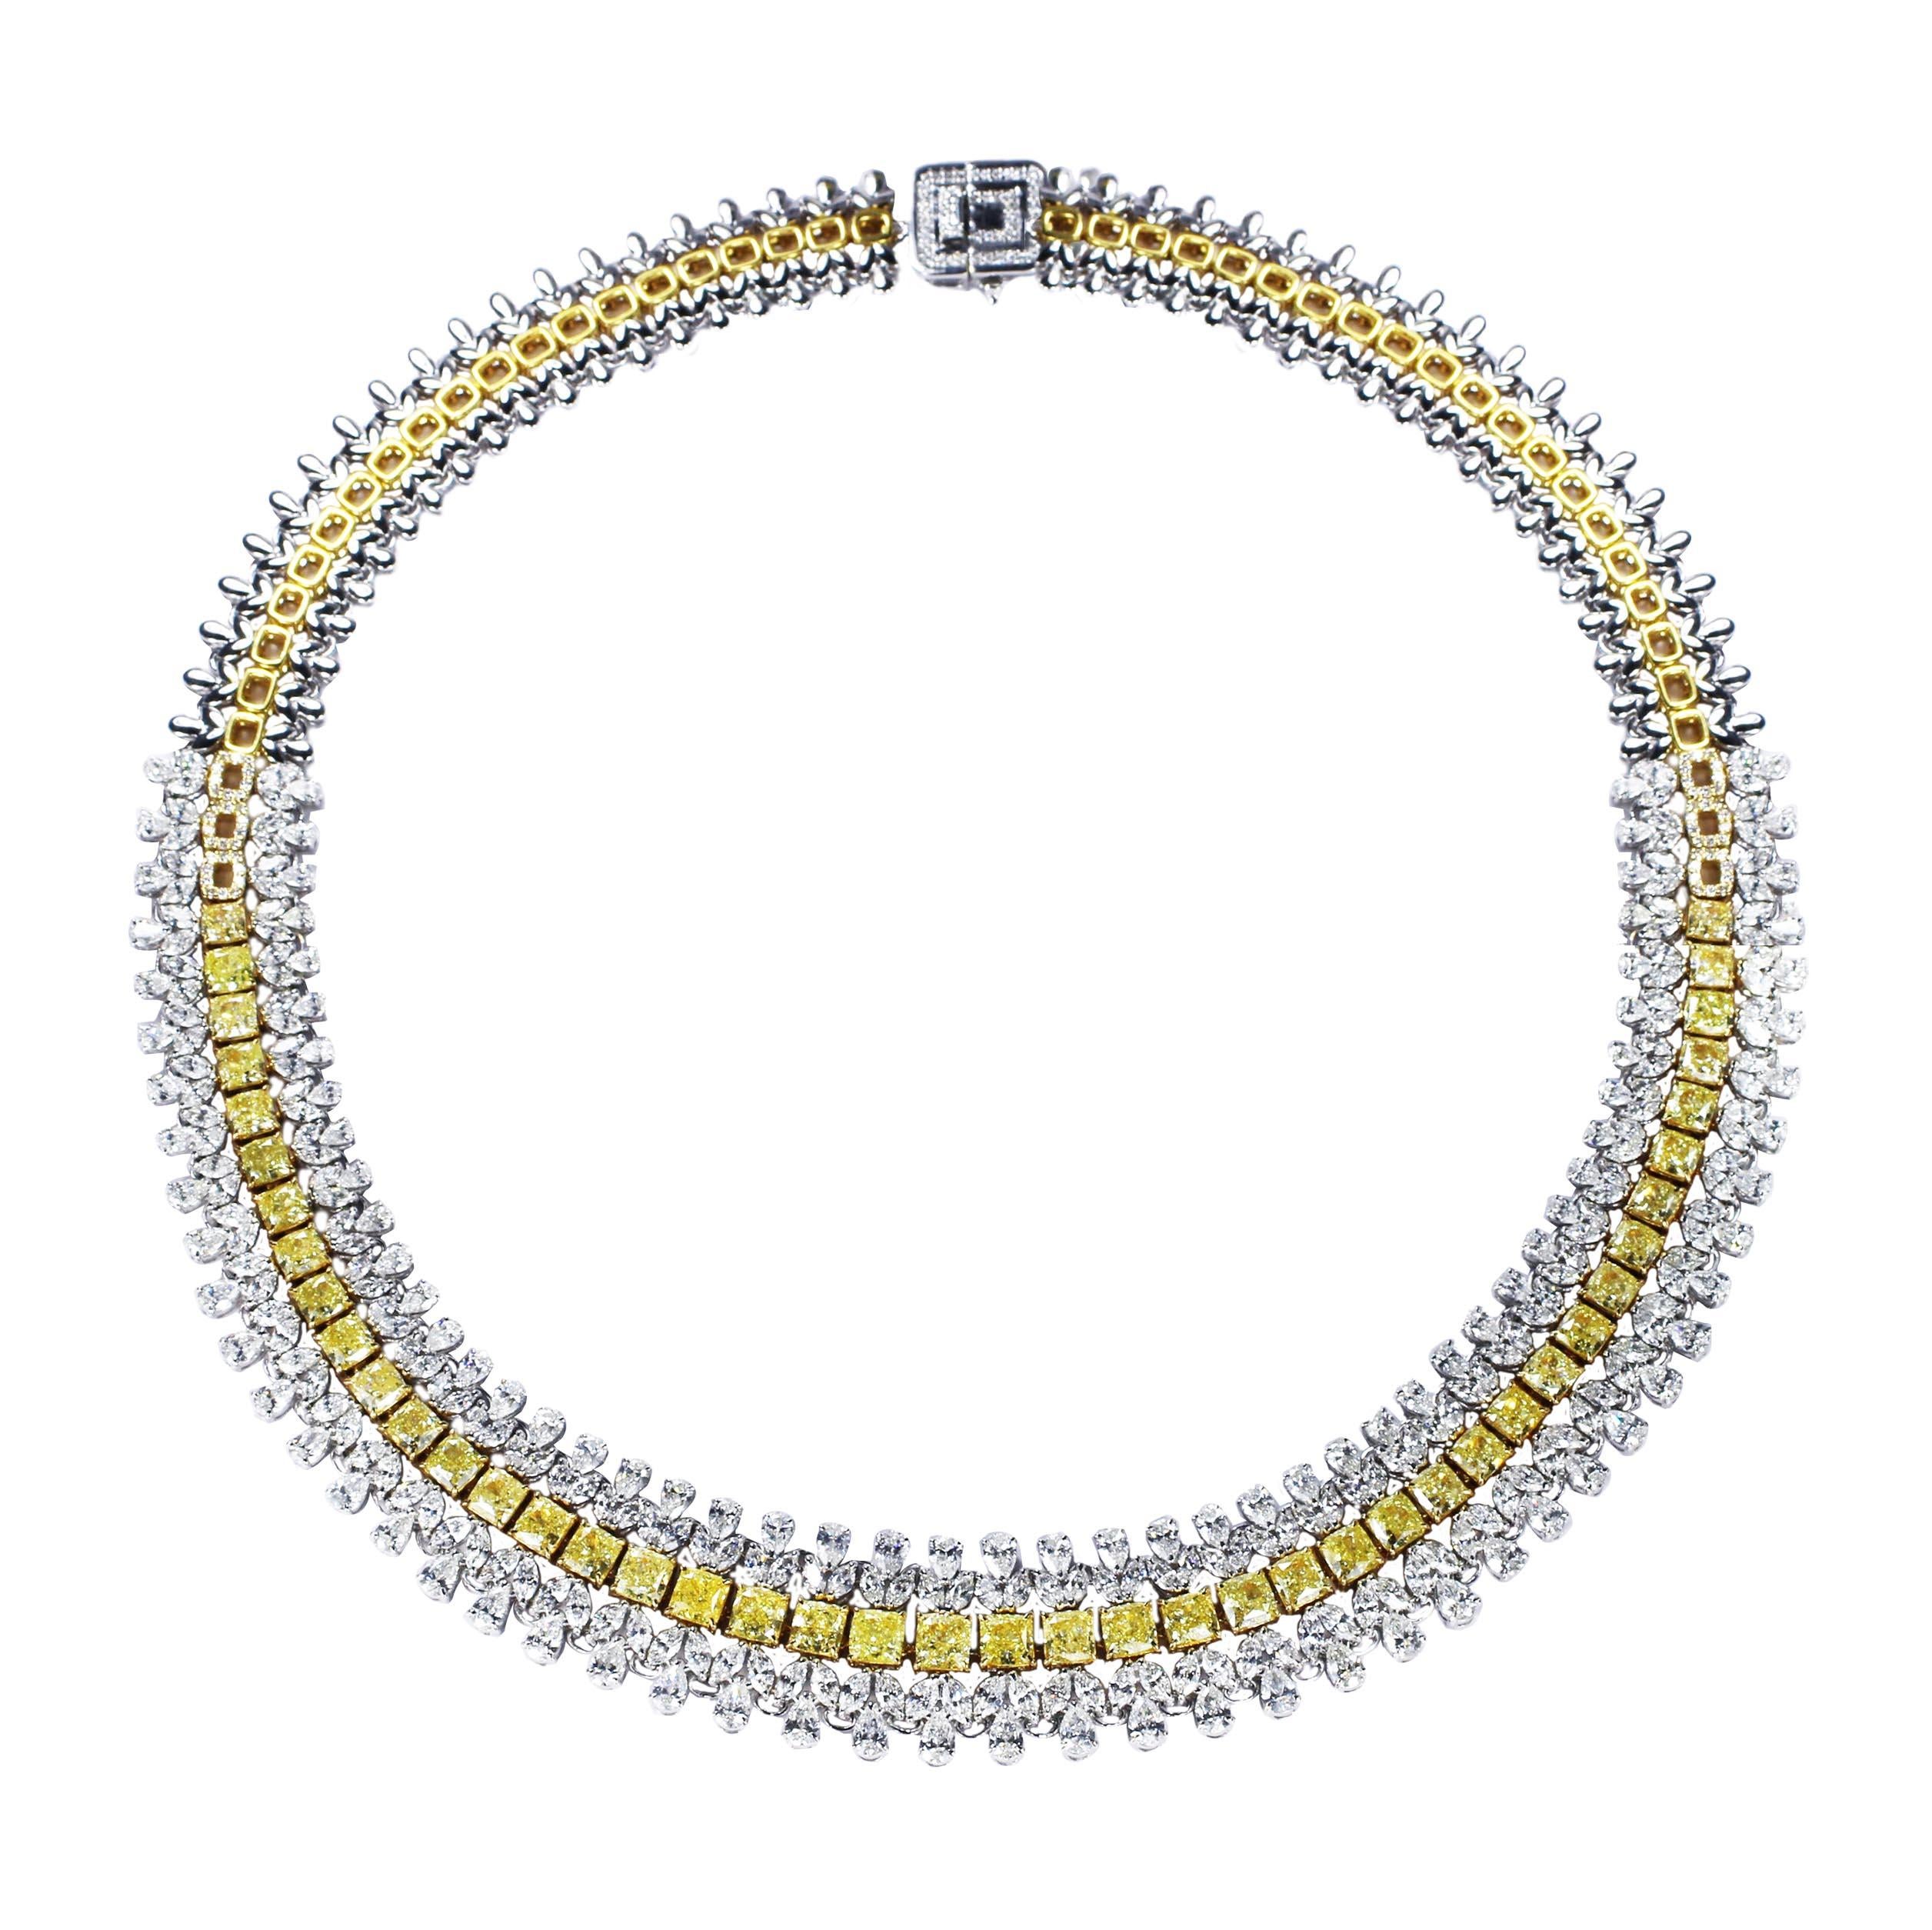 Yellow Cushion cut Diamonds and White Diamonds Necklace

This necklace set in 18K white and yellow gold captures the sumptuous shades of the sun with handpicked rare cushion cut yellow diamonds, beautifully enhanced with pristine white pears and